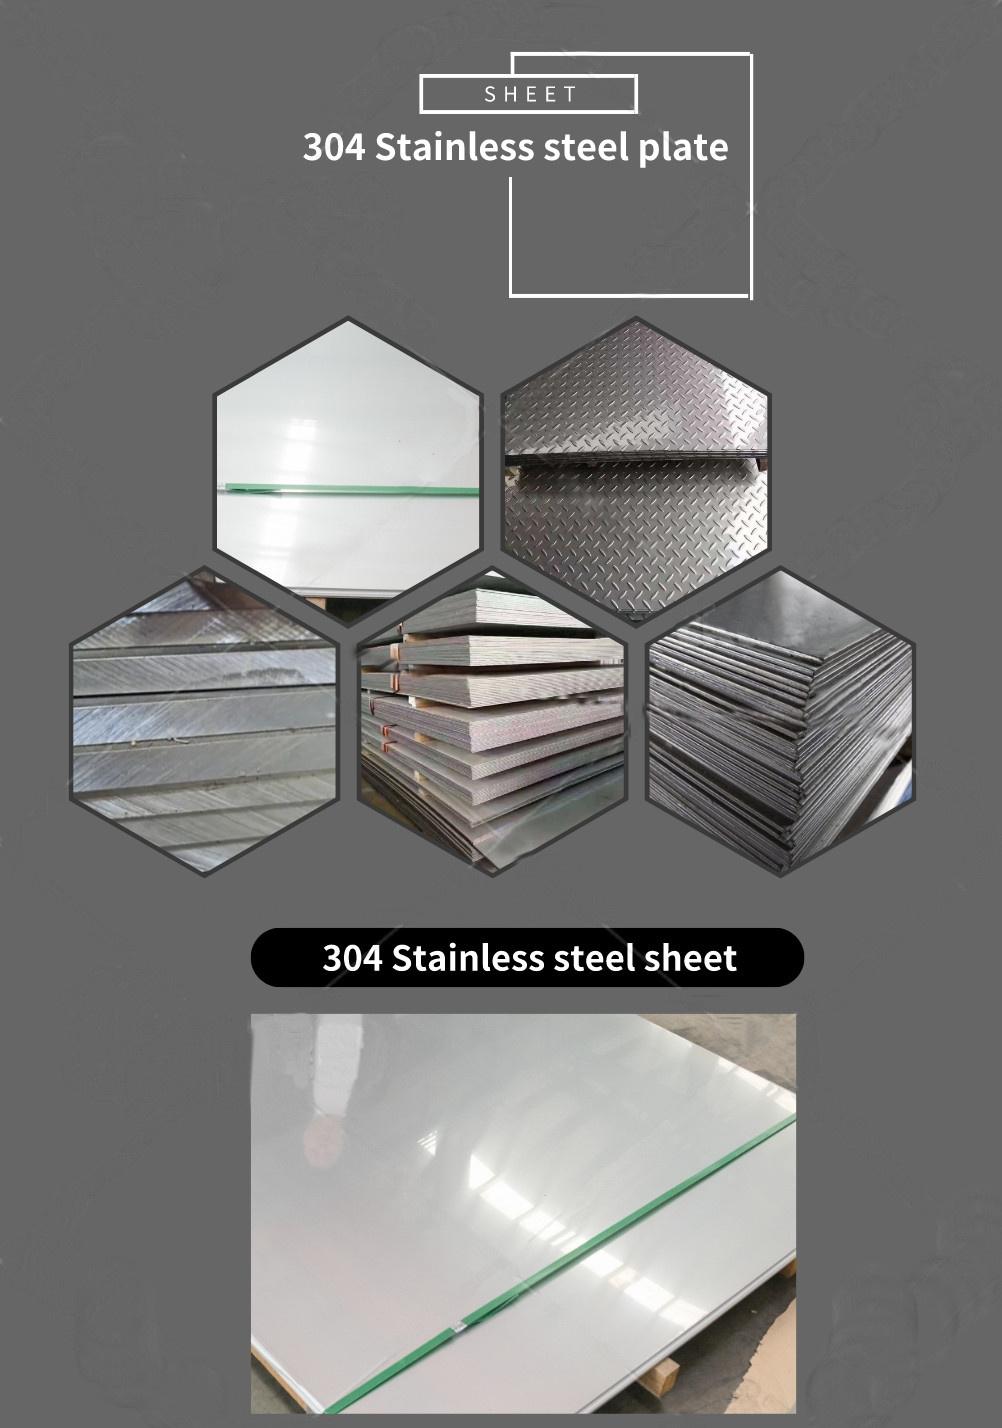 ASTM/GB/JIS 202 304ln Hot Rolled Stainless Steel Plate for Boat Board